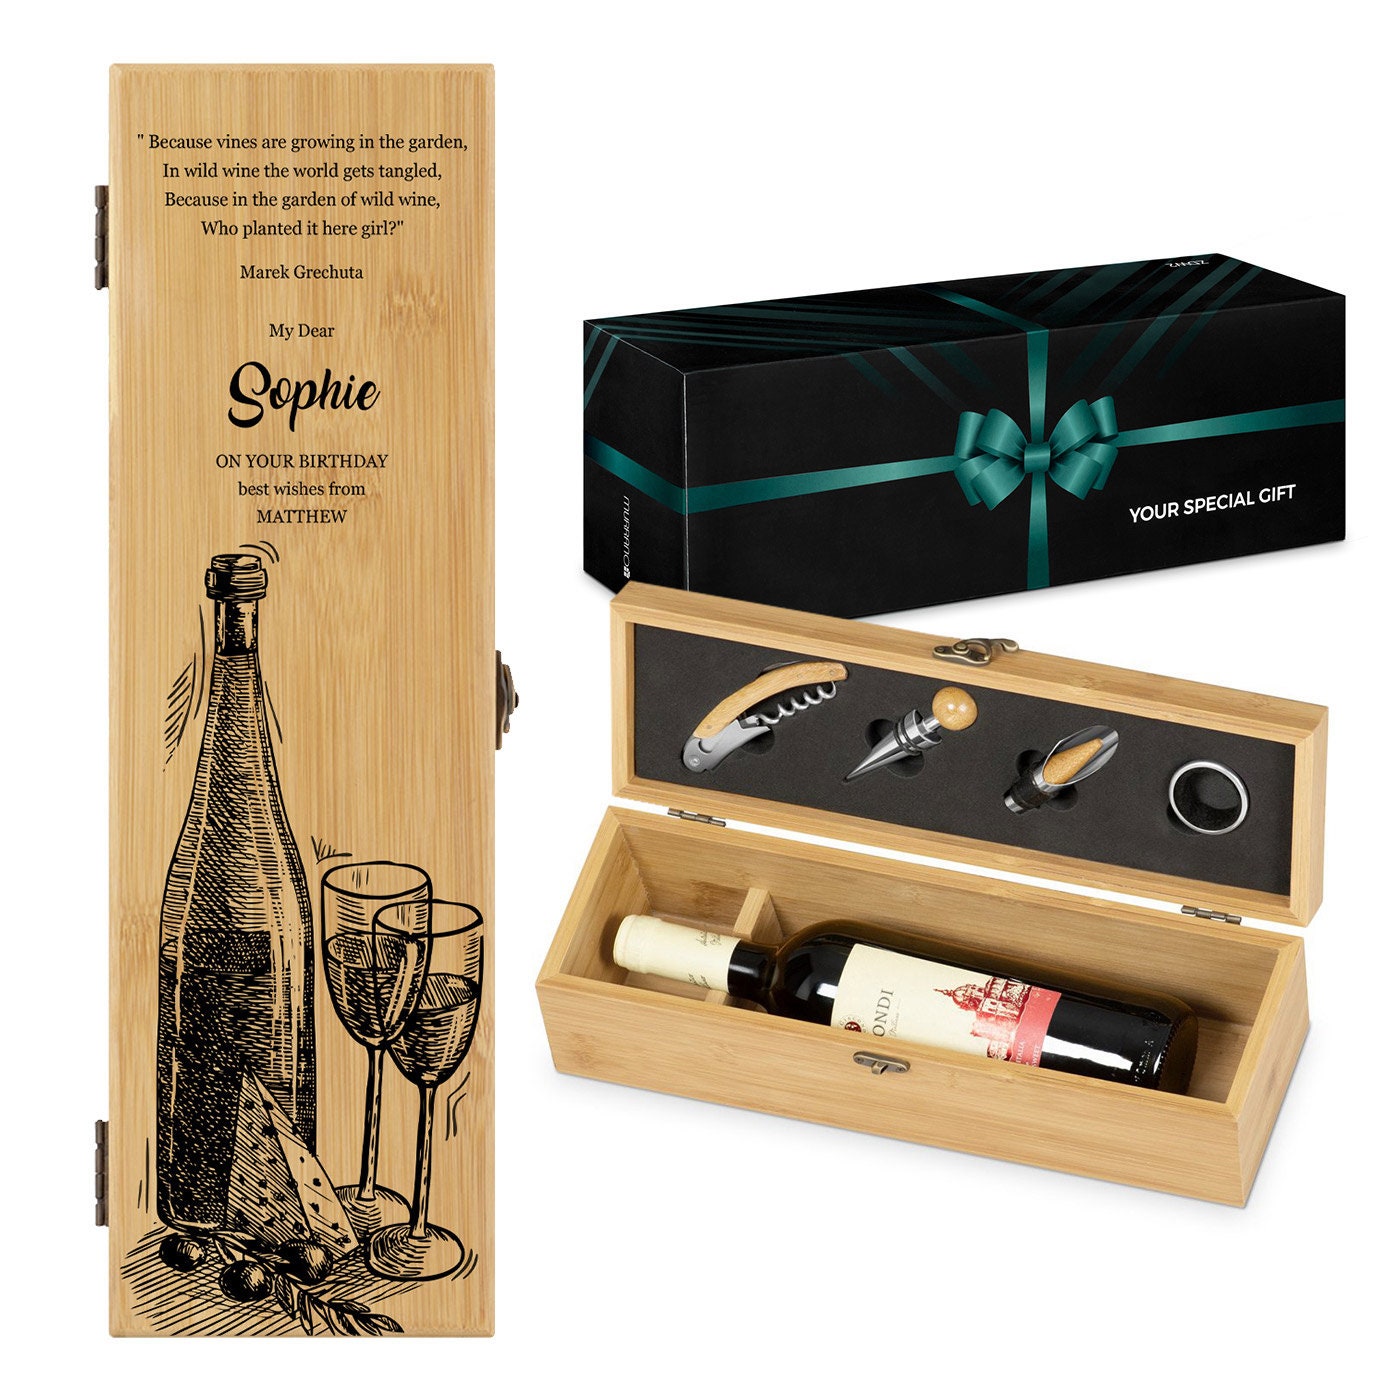 Wine Gifts Set – Wine Accessories Set w/Wooden Box- Wine Set Includes Rechargeable Wine Opener, Aerator, Wine Stoppers & Pairing Guide- Wine Basket